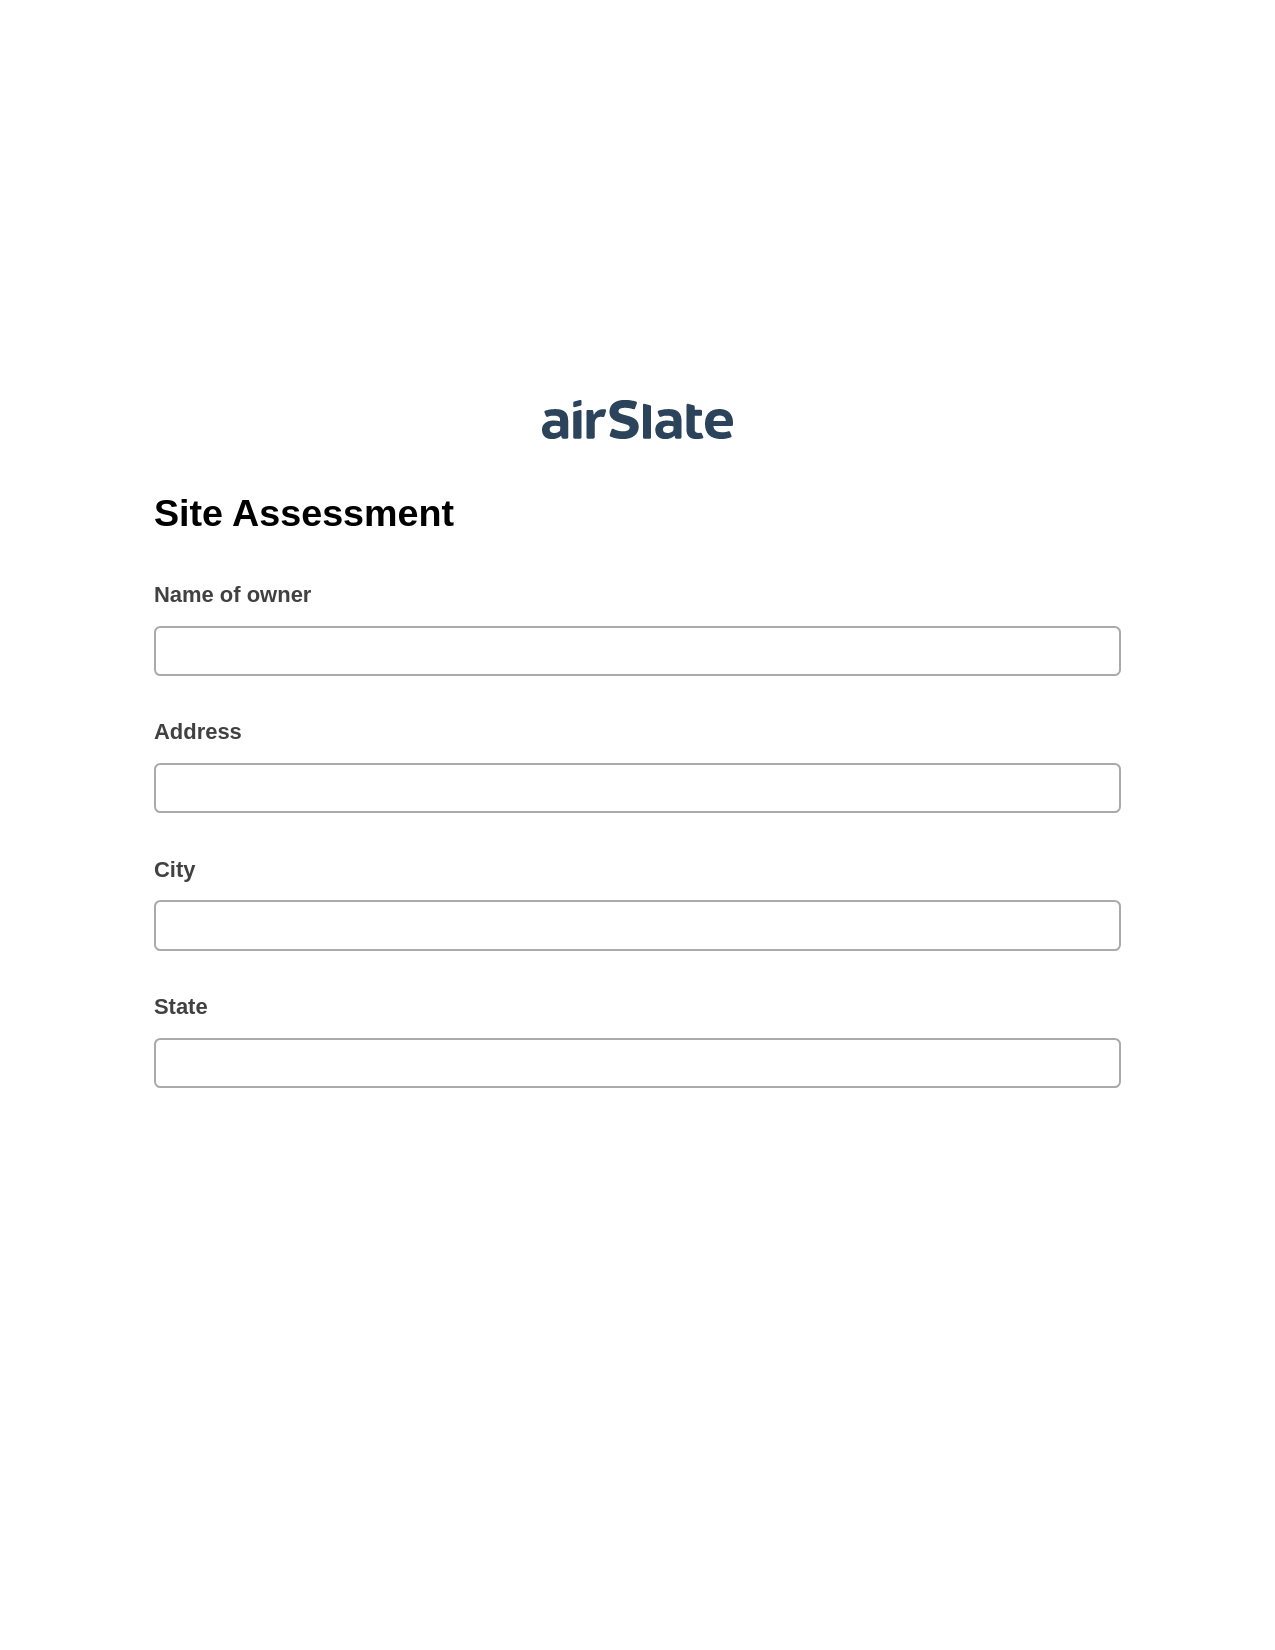 Multirole Site Assessment Pre-fill from Salesforce Record Bot, Email Notification Bot, Export to Google Sheet Bot